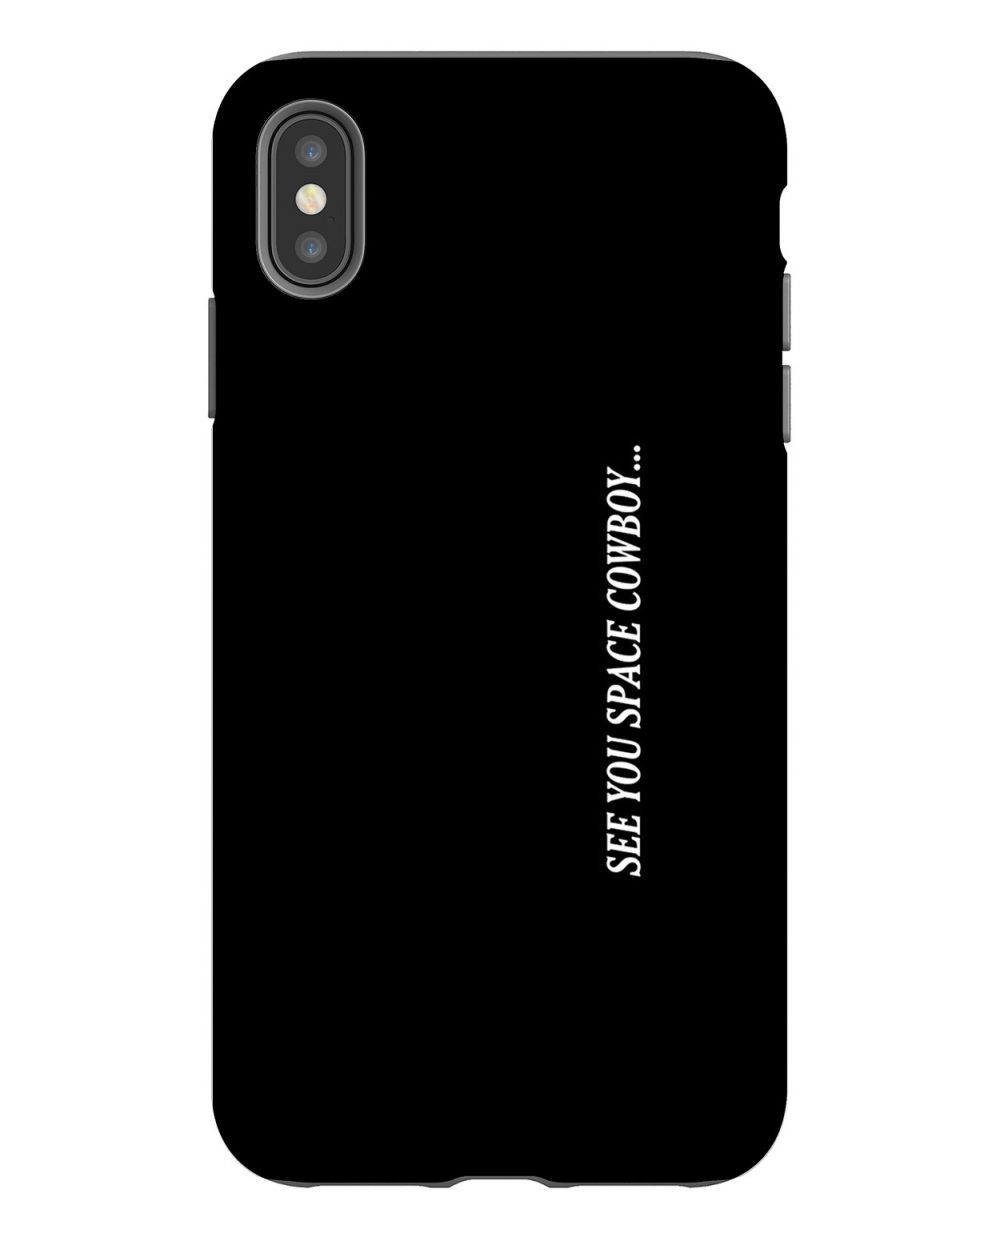 See You Space Cowboy iPhone Case 7/7 Plus,8/8 Plus,X,XS,XR,XS,Max ...